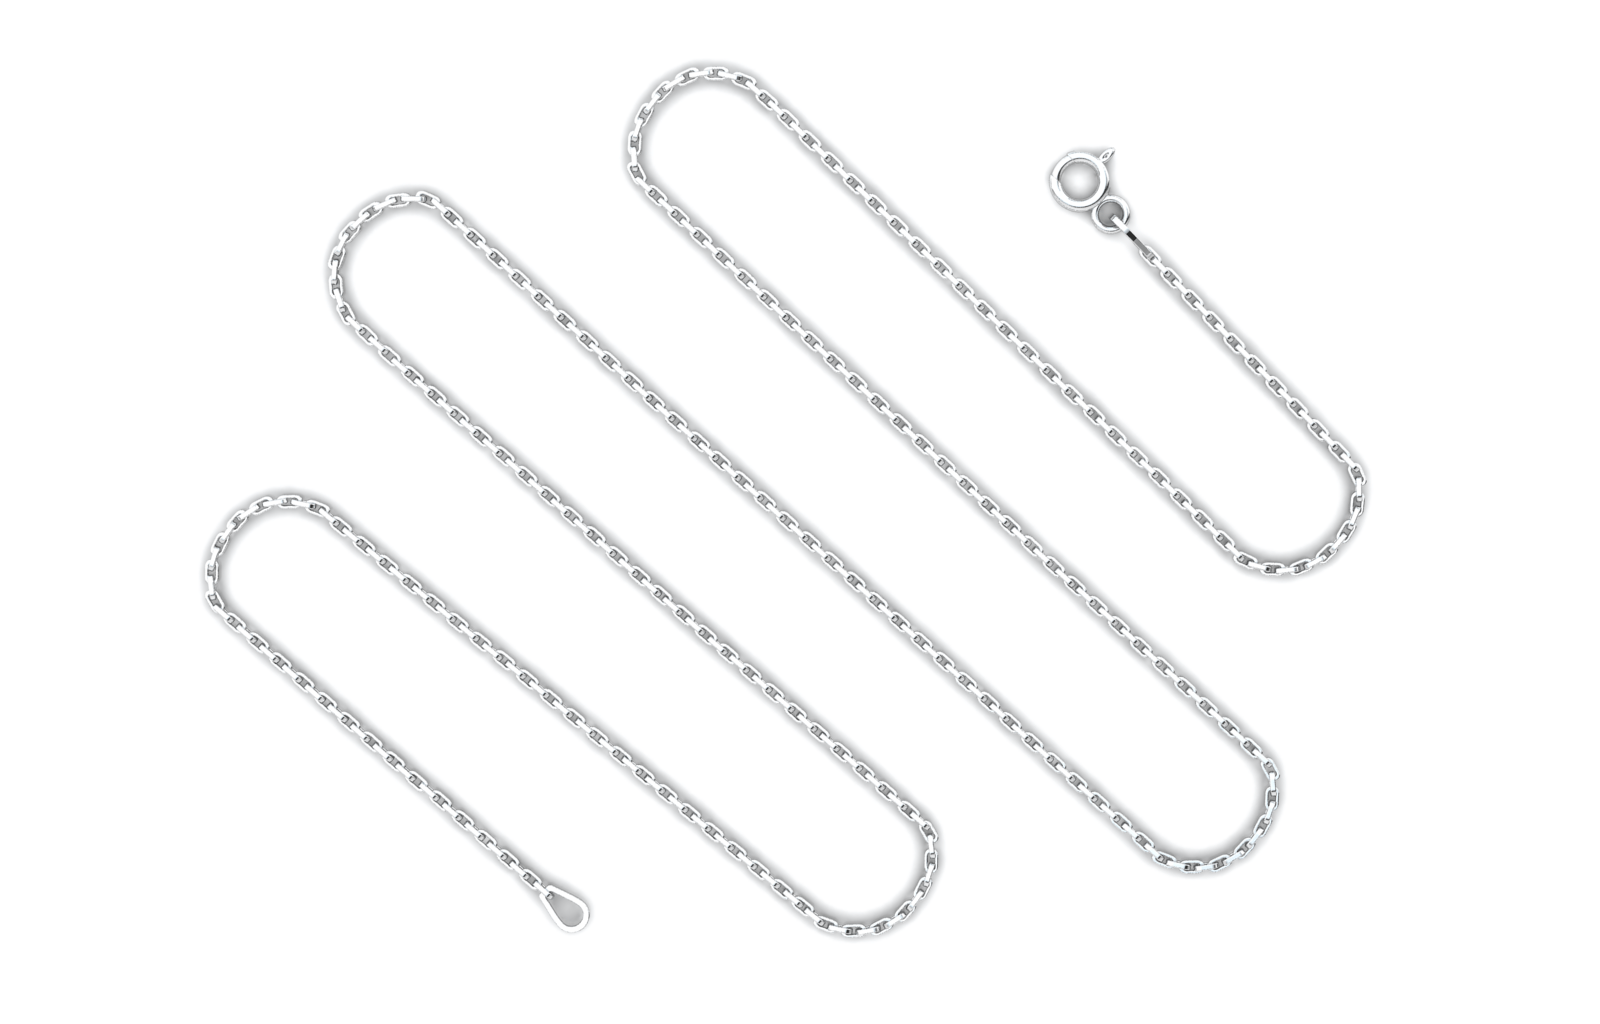 Cable Medium (1.5mm) Sterling Silver Chain, 16", 18", 20", 24", 30"